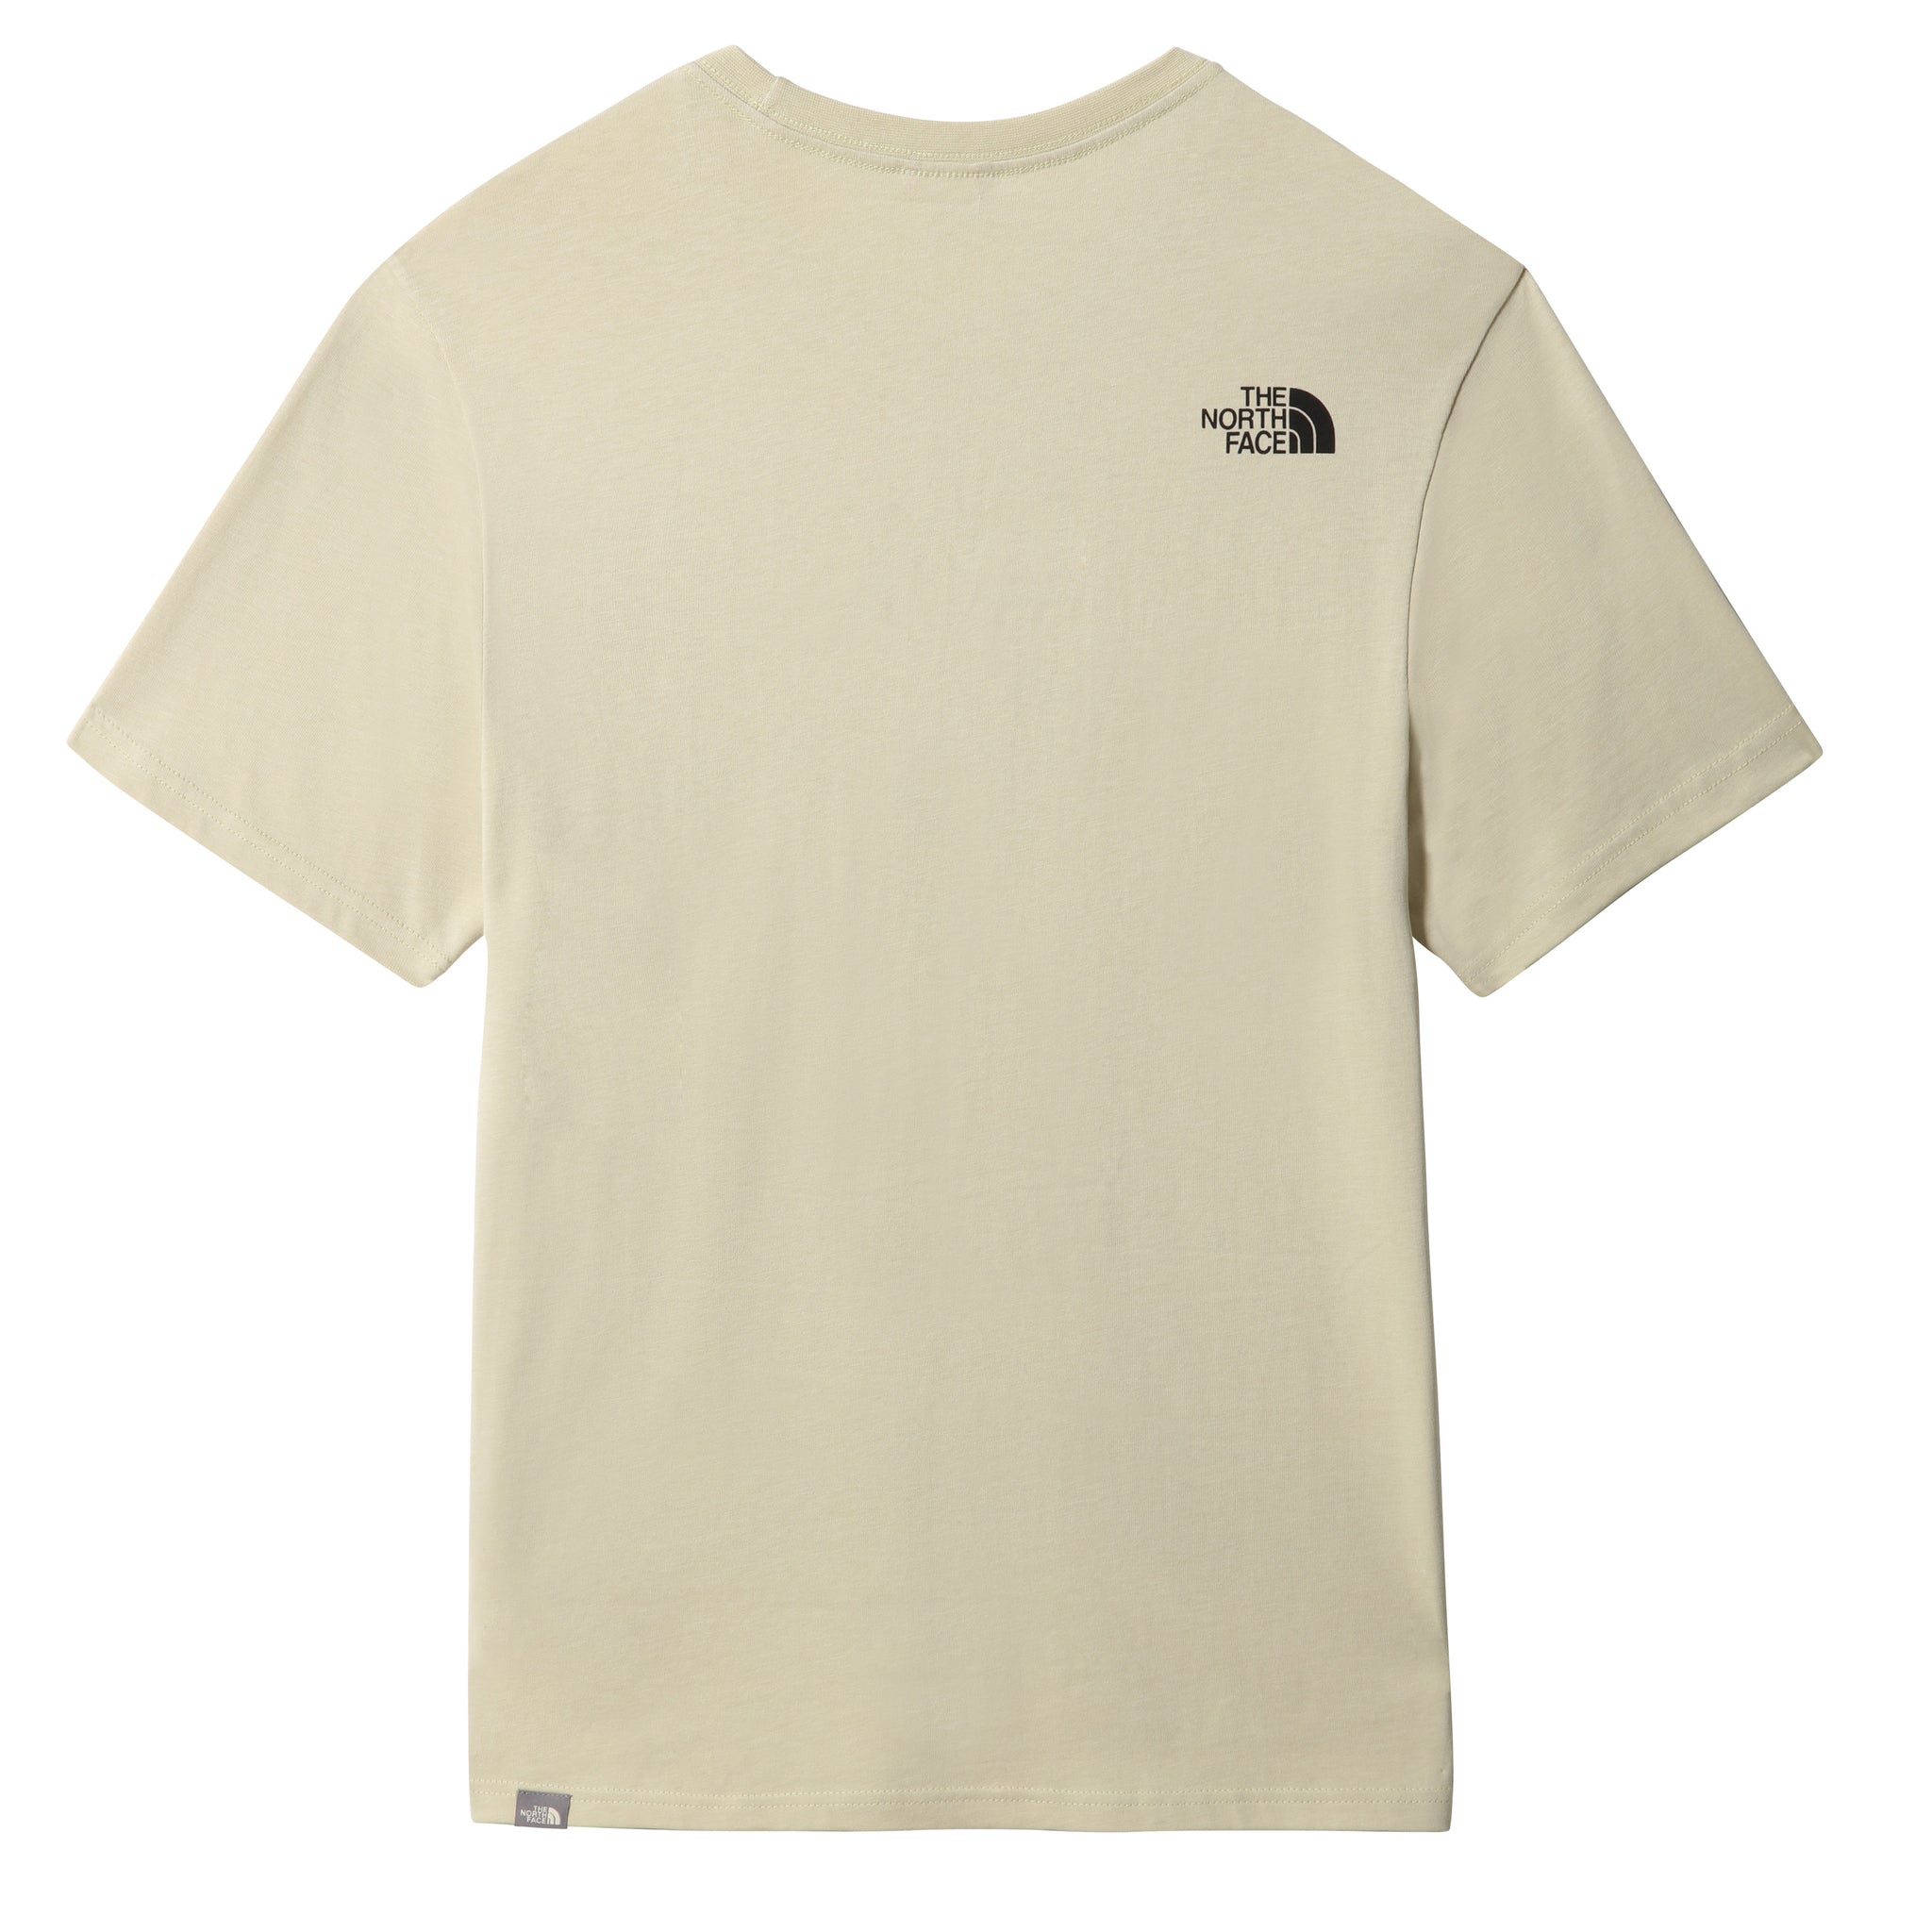 T-Shirt The North Face Uomo / Beige - Ideal Moda